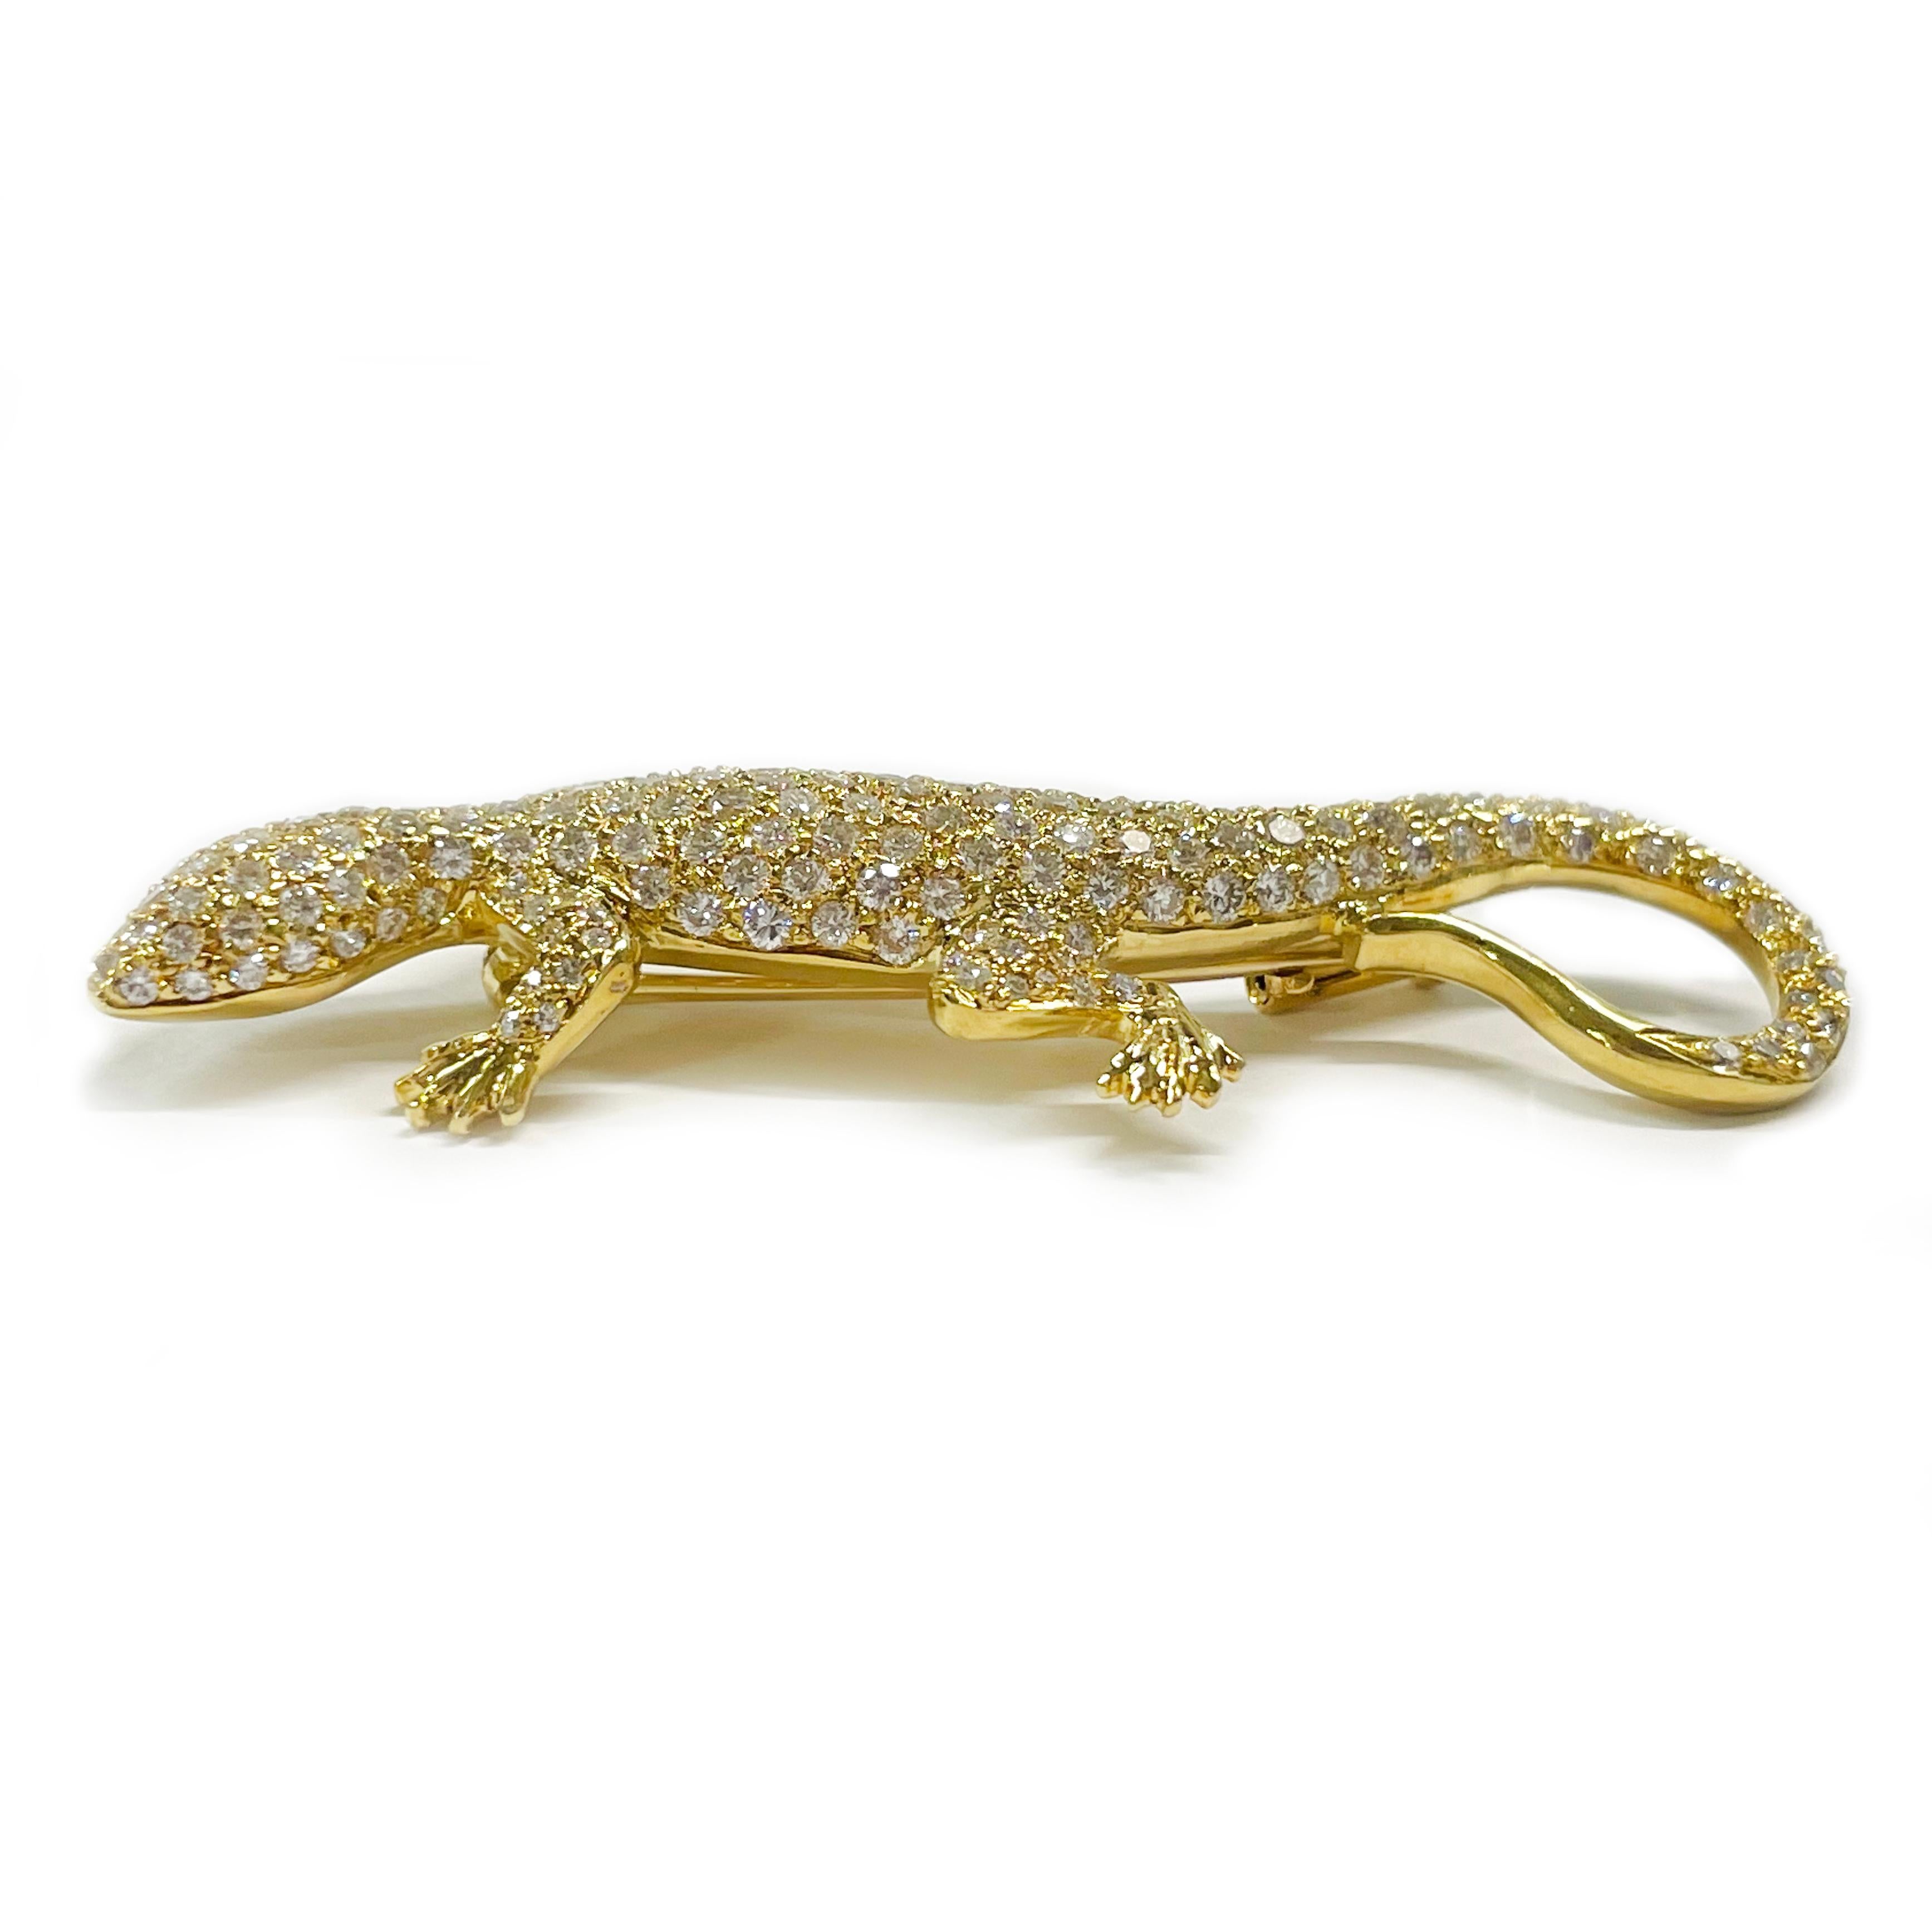 18 Karat Yellow Gold Diamond Lizard Brooch/Pin. This super sparkly little critter features 188 brilliant-cut diamonds pave-set on the head, body, legs and partially on the tail. The diamonds range in size from 1.1 to 1.5mm and are VS1-VS2 in clarity